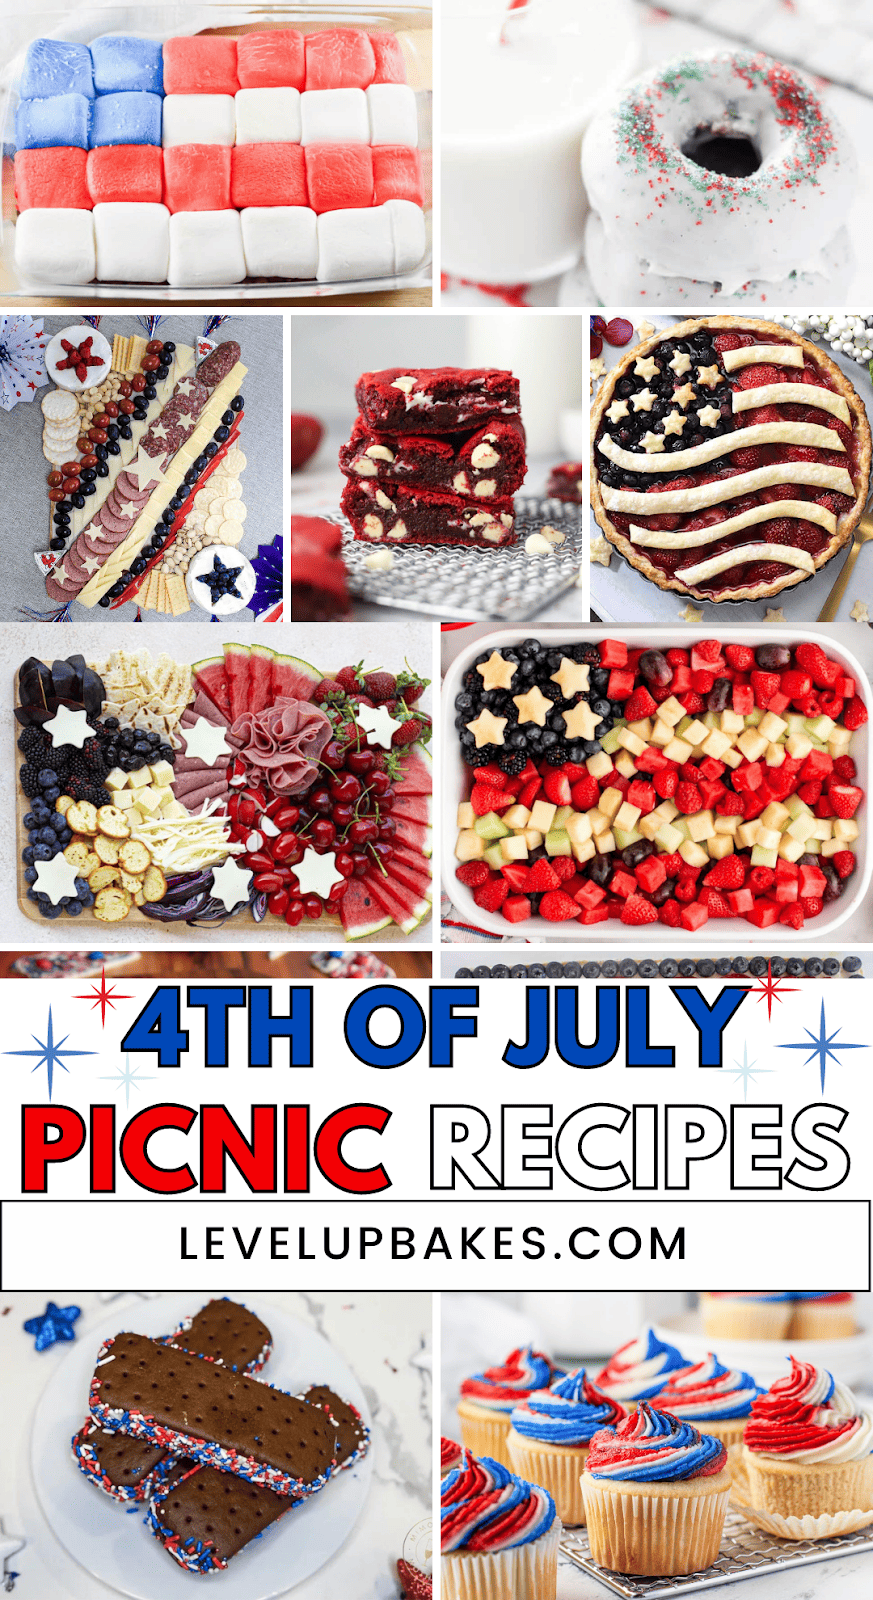 25 Easy Picnic Desserts for the 4th of July pinterest pin.